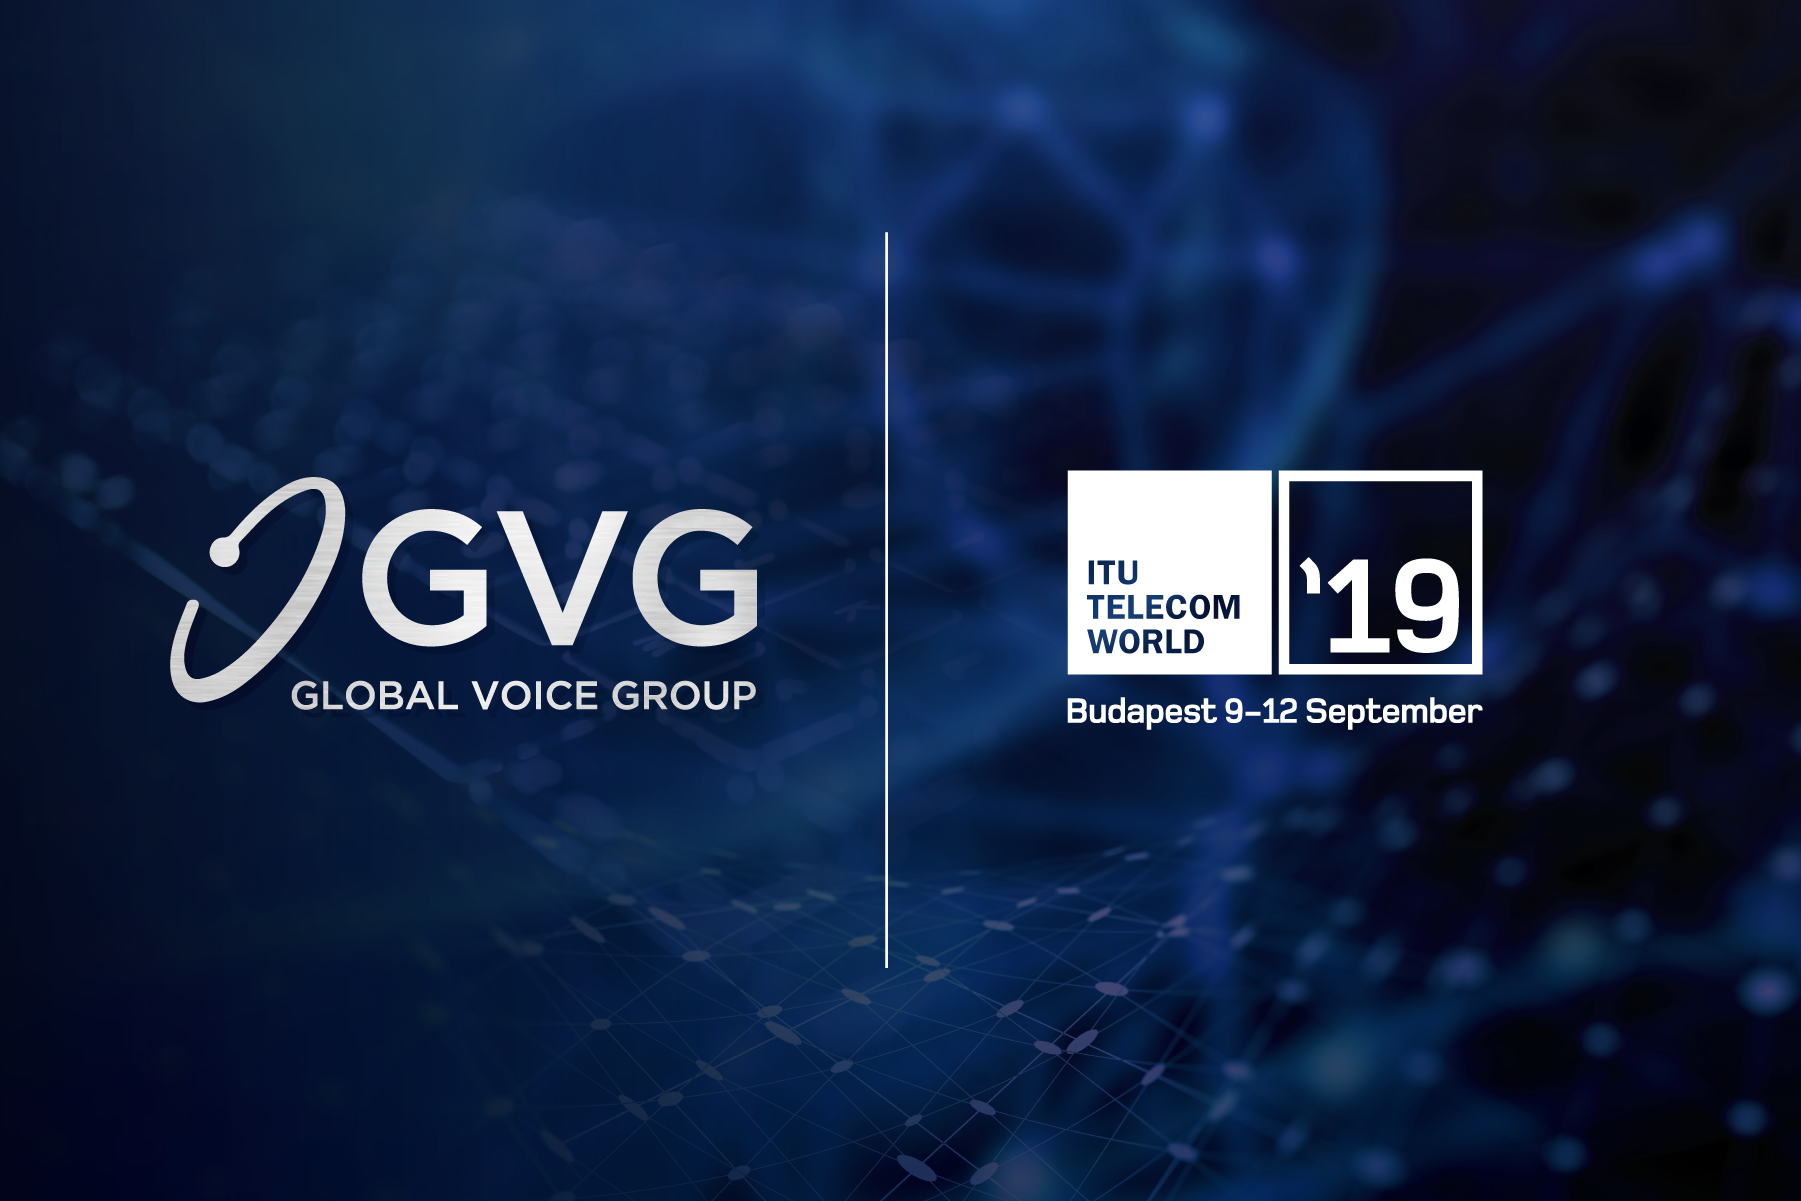 Global Voice Group Participation In The ITU Telecom World Event In Budapest Sept 2019